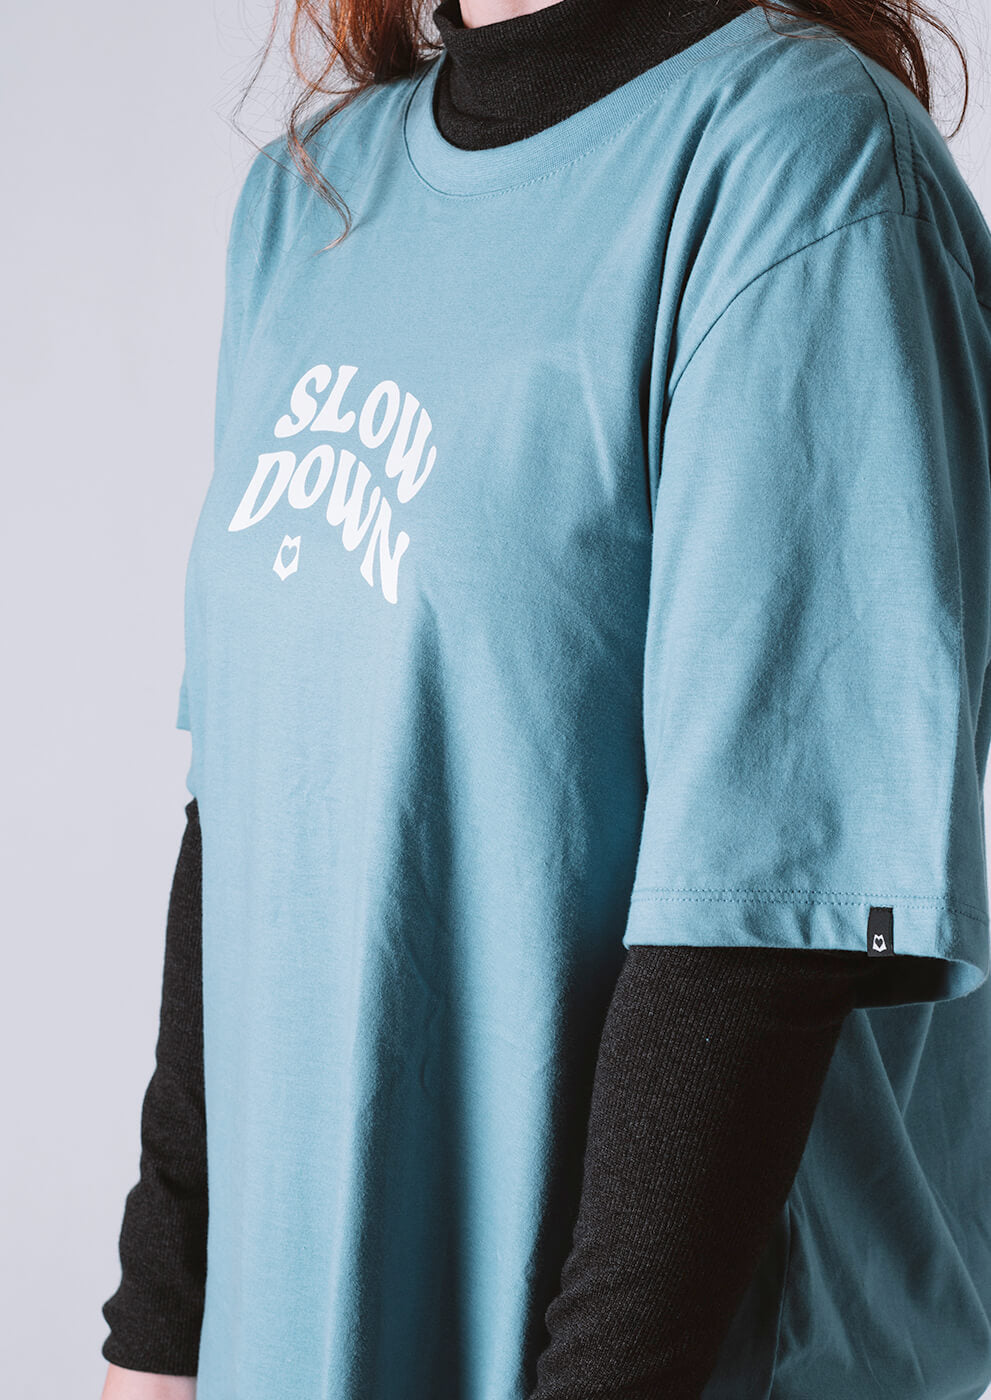 T-shirt over azul slow down